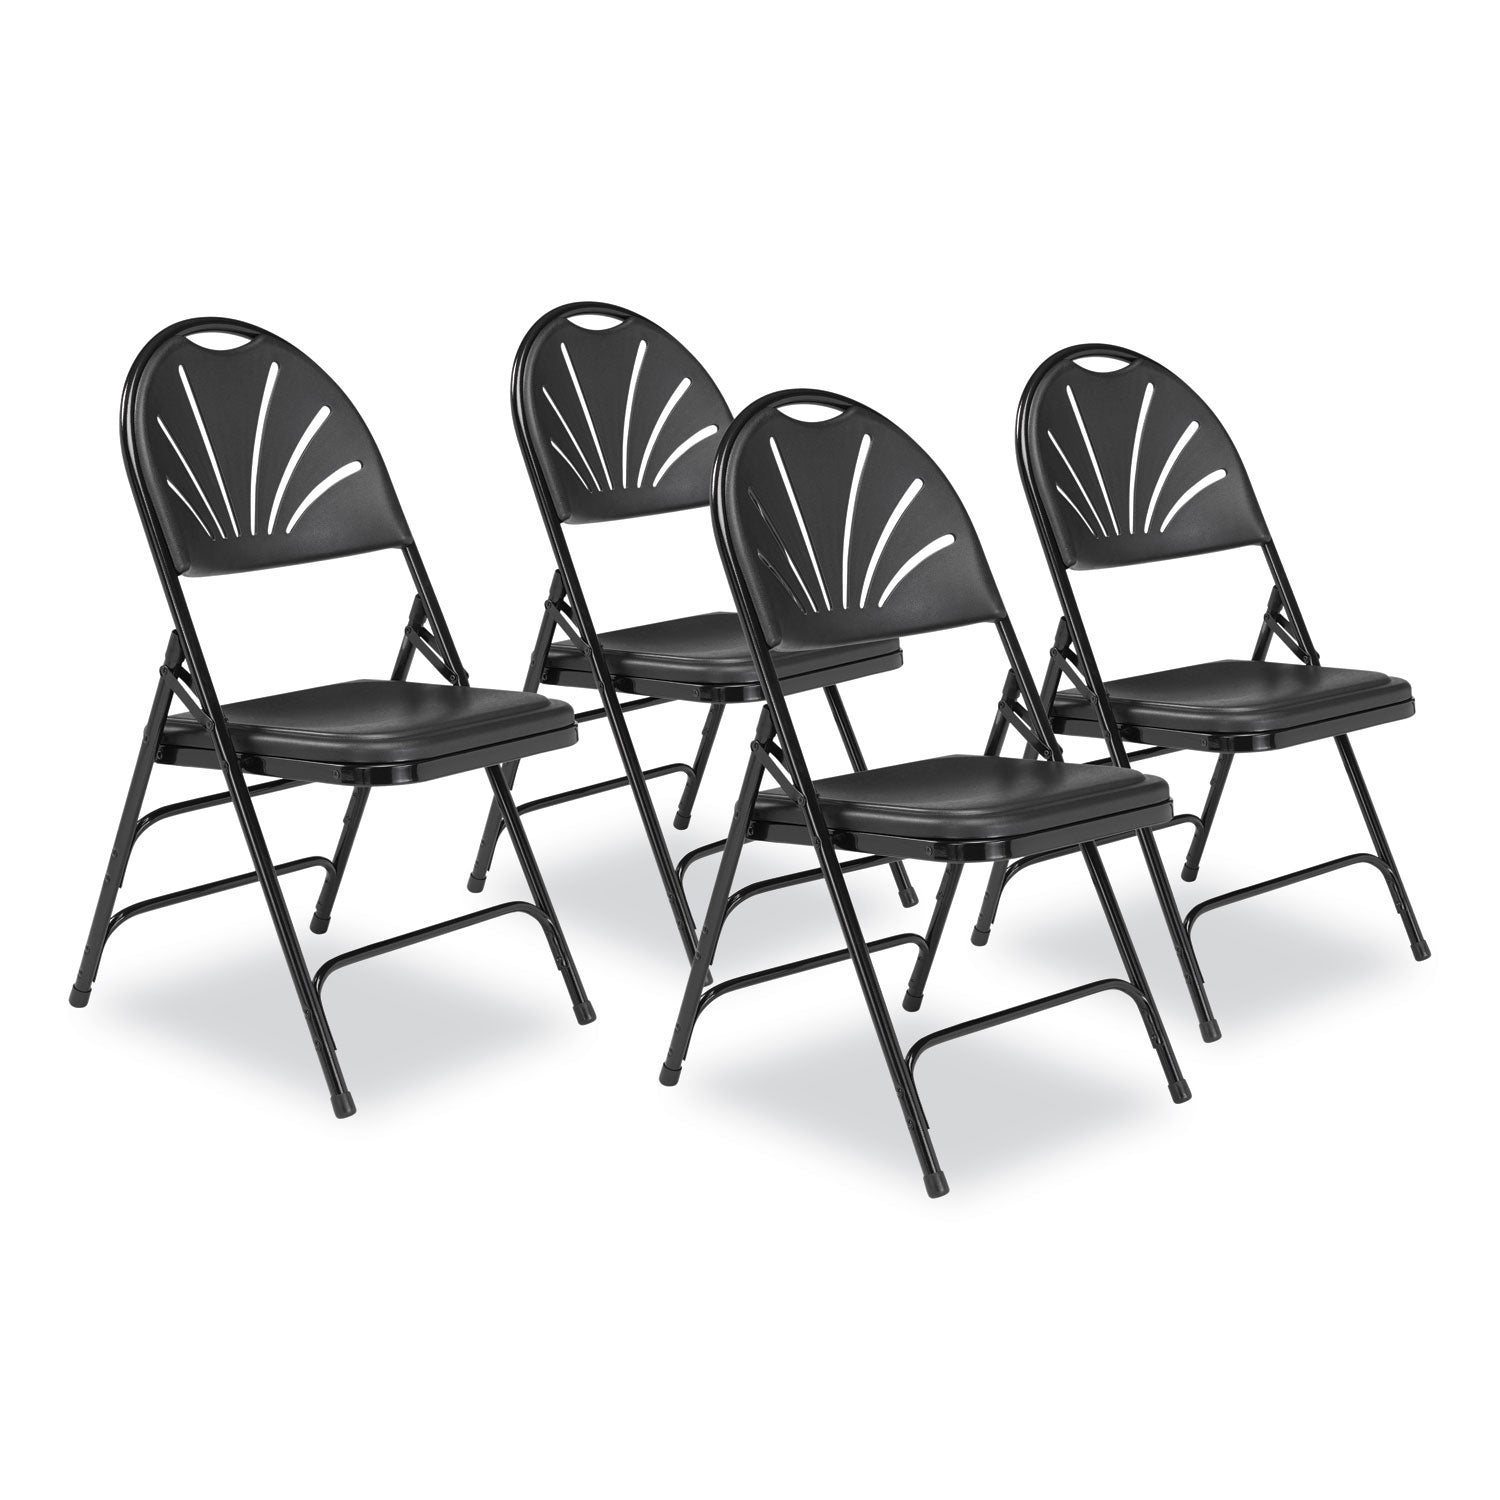 1100-series-fan-back-tri-brace-dual-hinge-folding-chair-supports-500-lb-1775-seat-ht-black-4-ct-ships-in-1-3-bus-days_nps1110 - 1